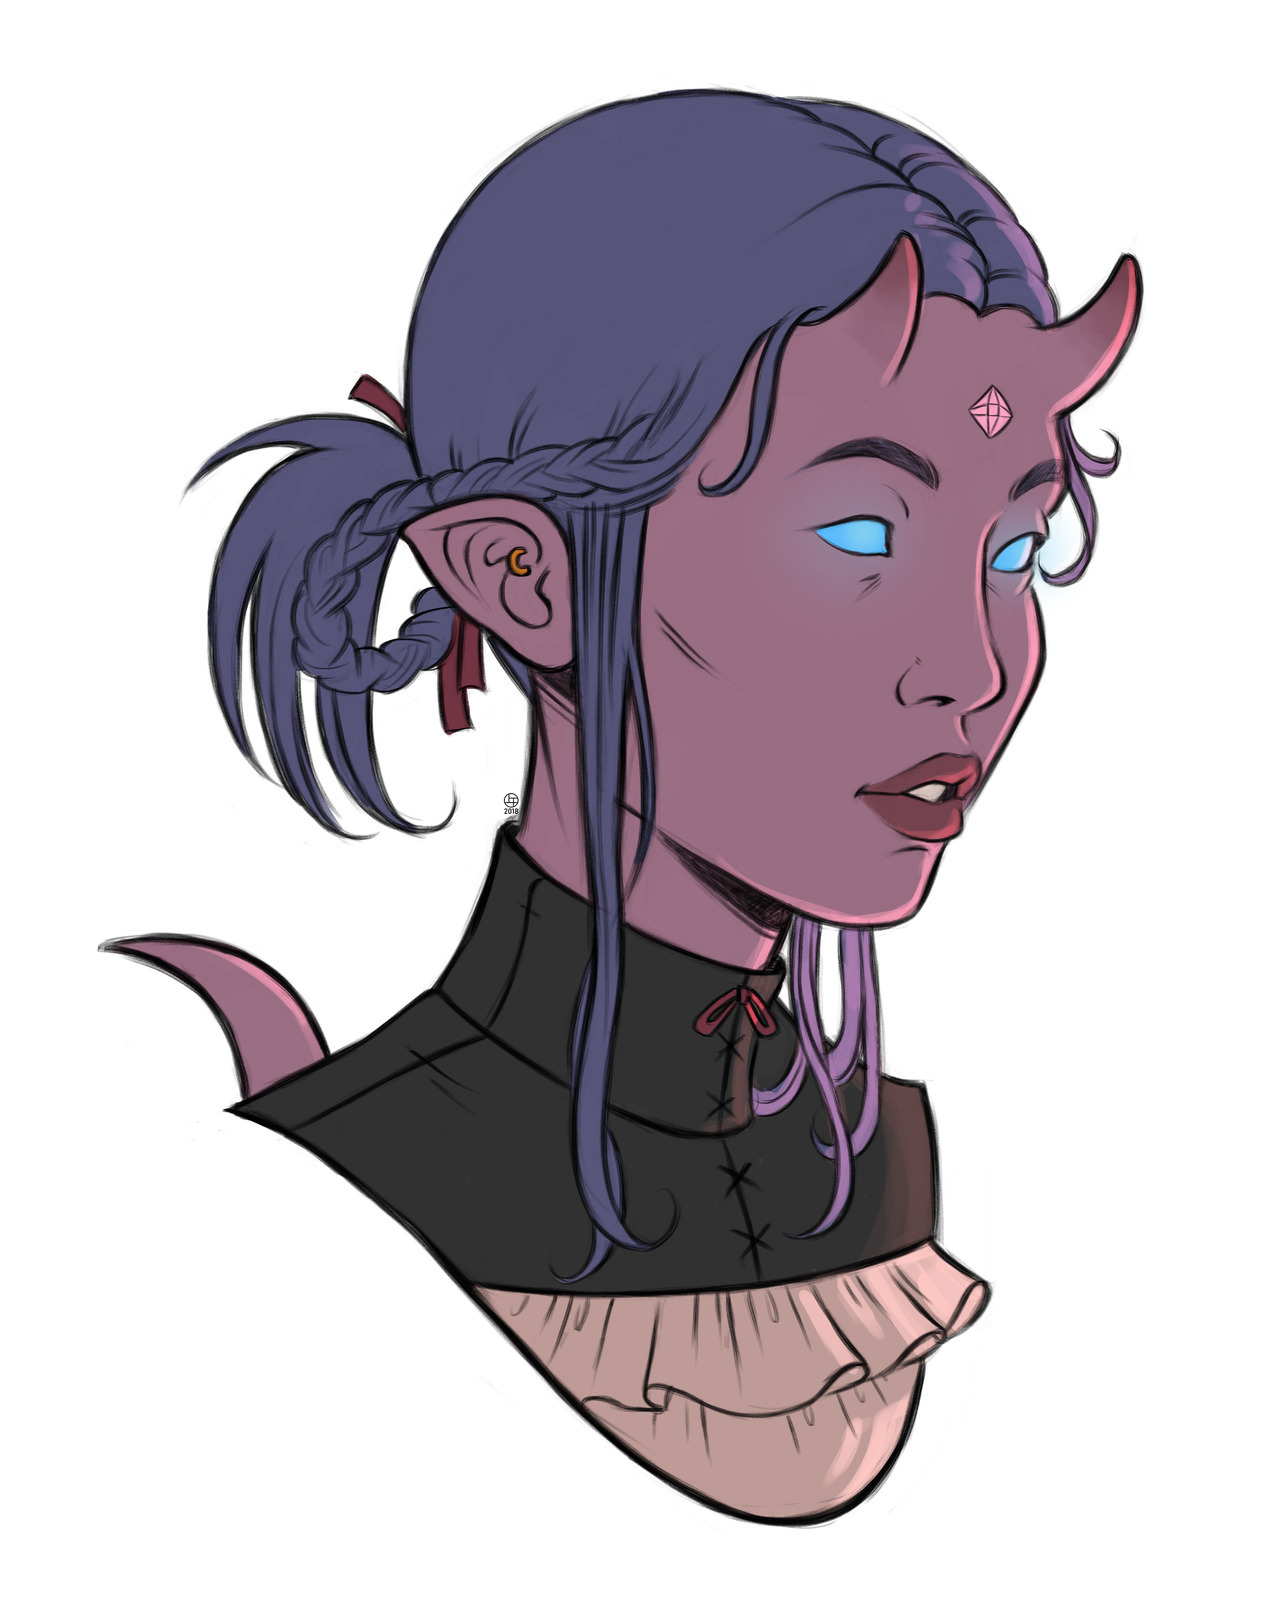 IFWERELOST — A tiefling for the DnD campaign.